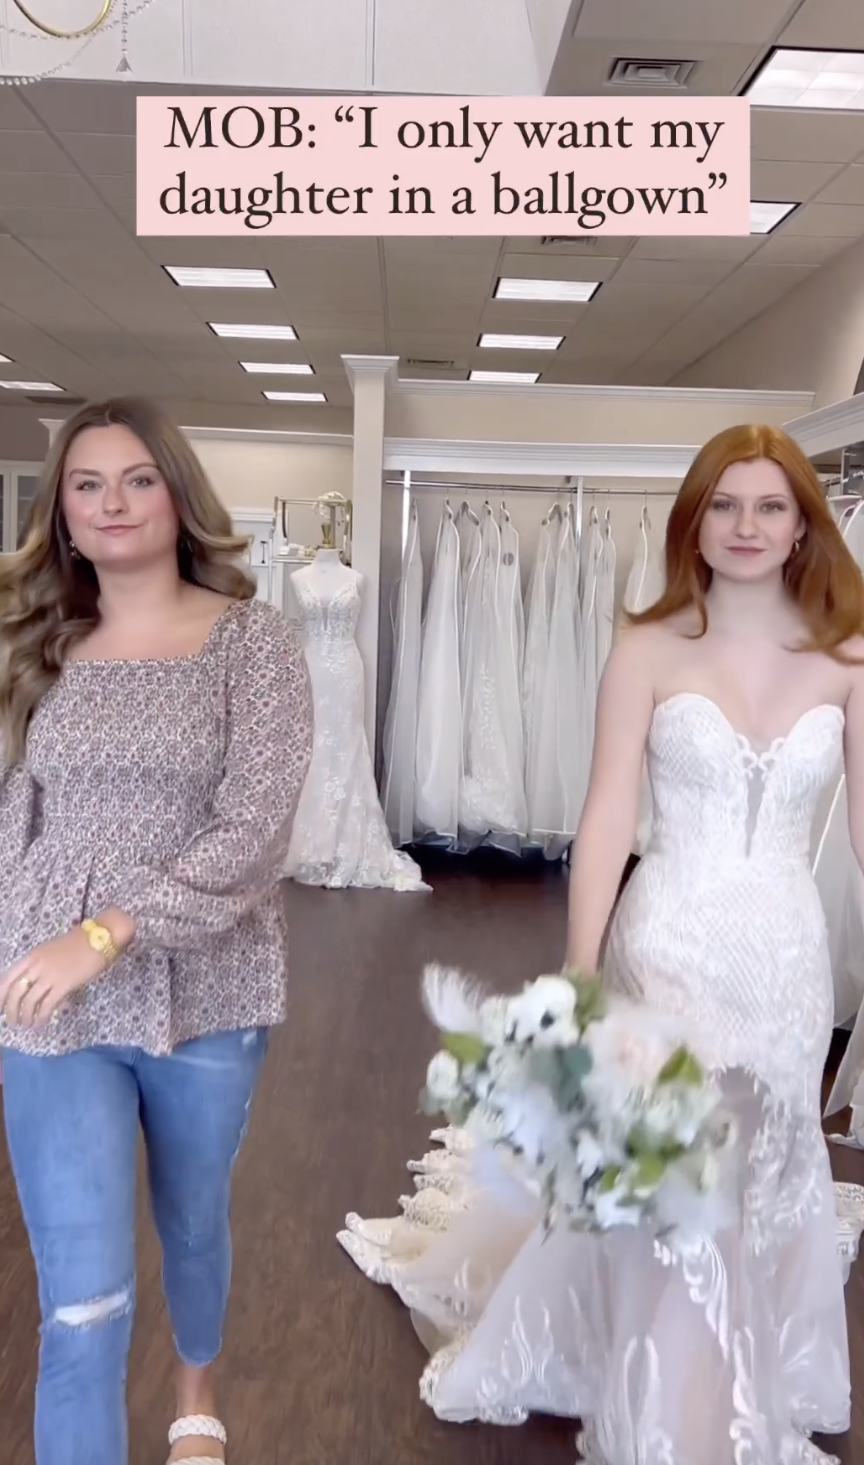 The redheaded woman is supported by a friend | Source: instagram.com/celebrationbridalandtux